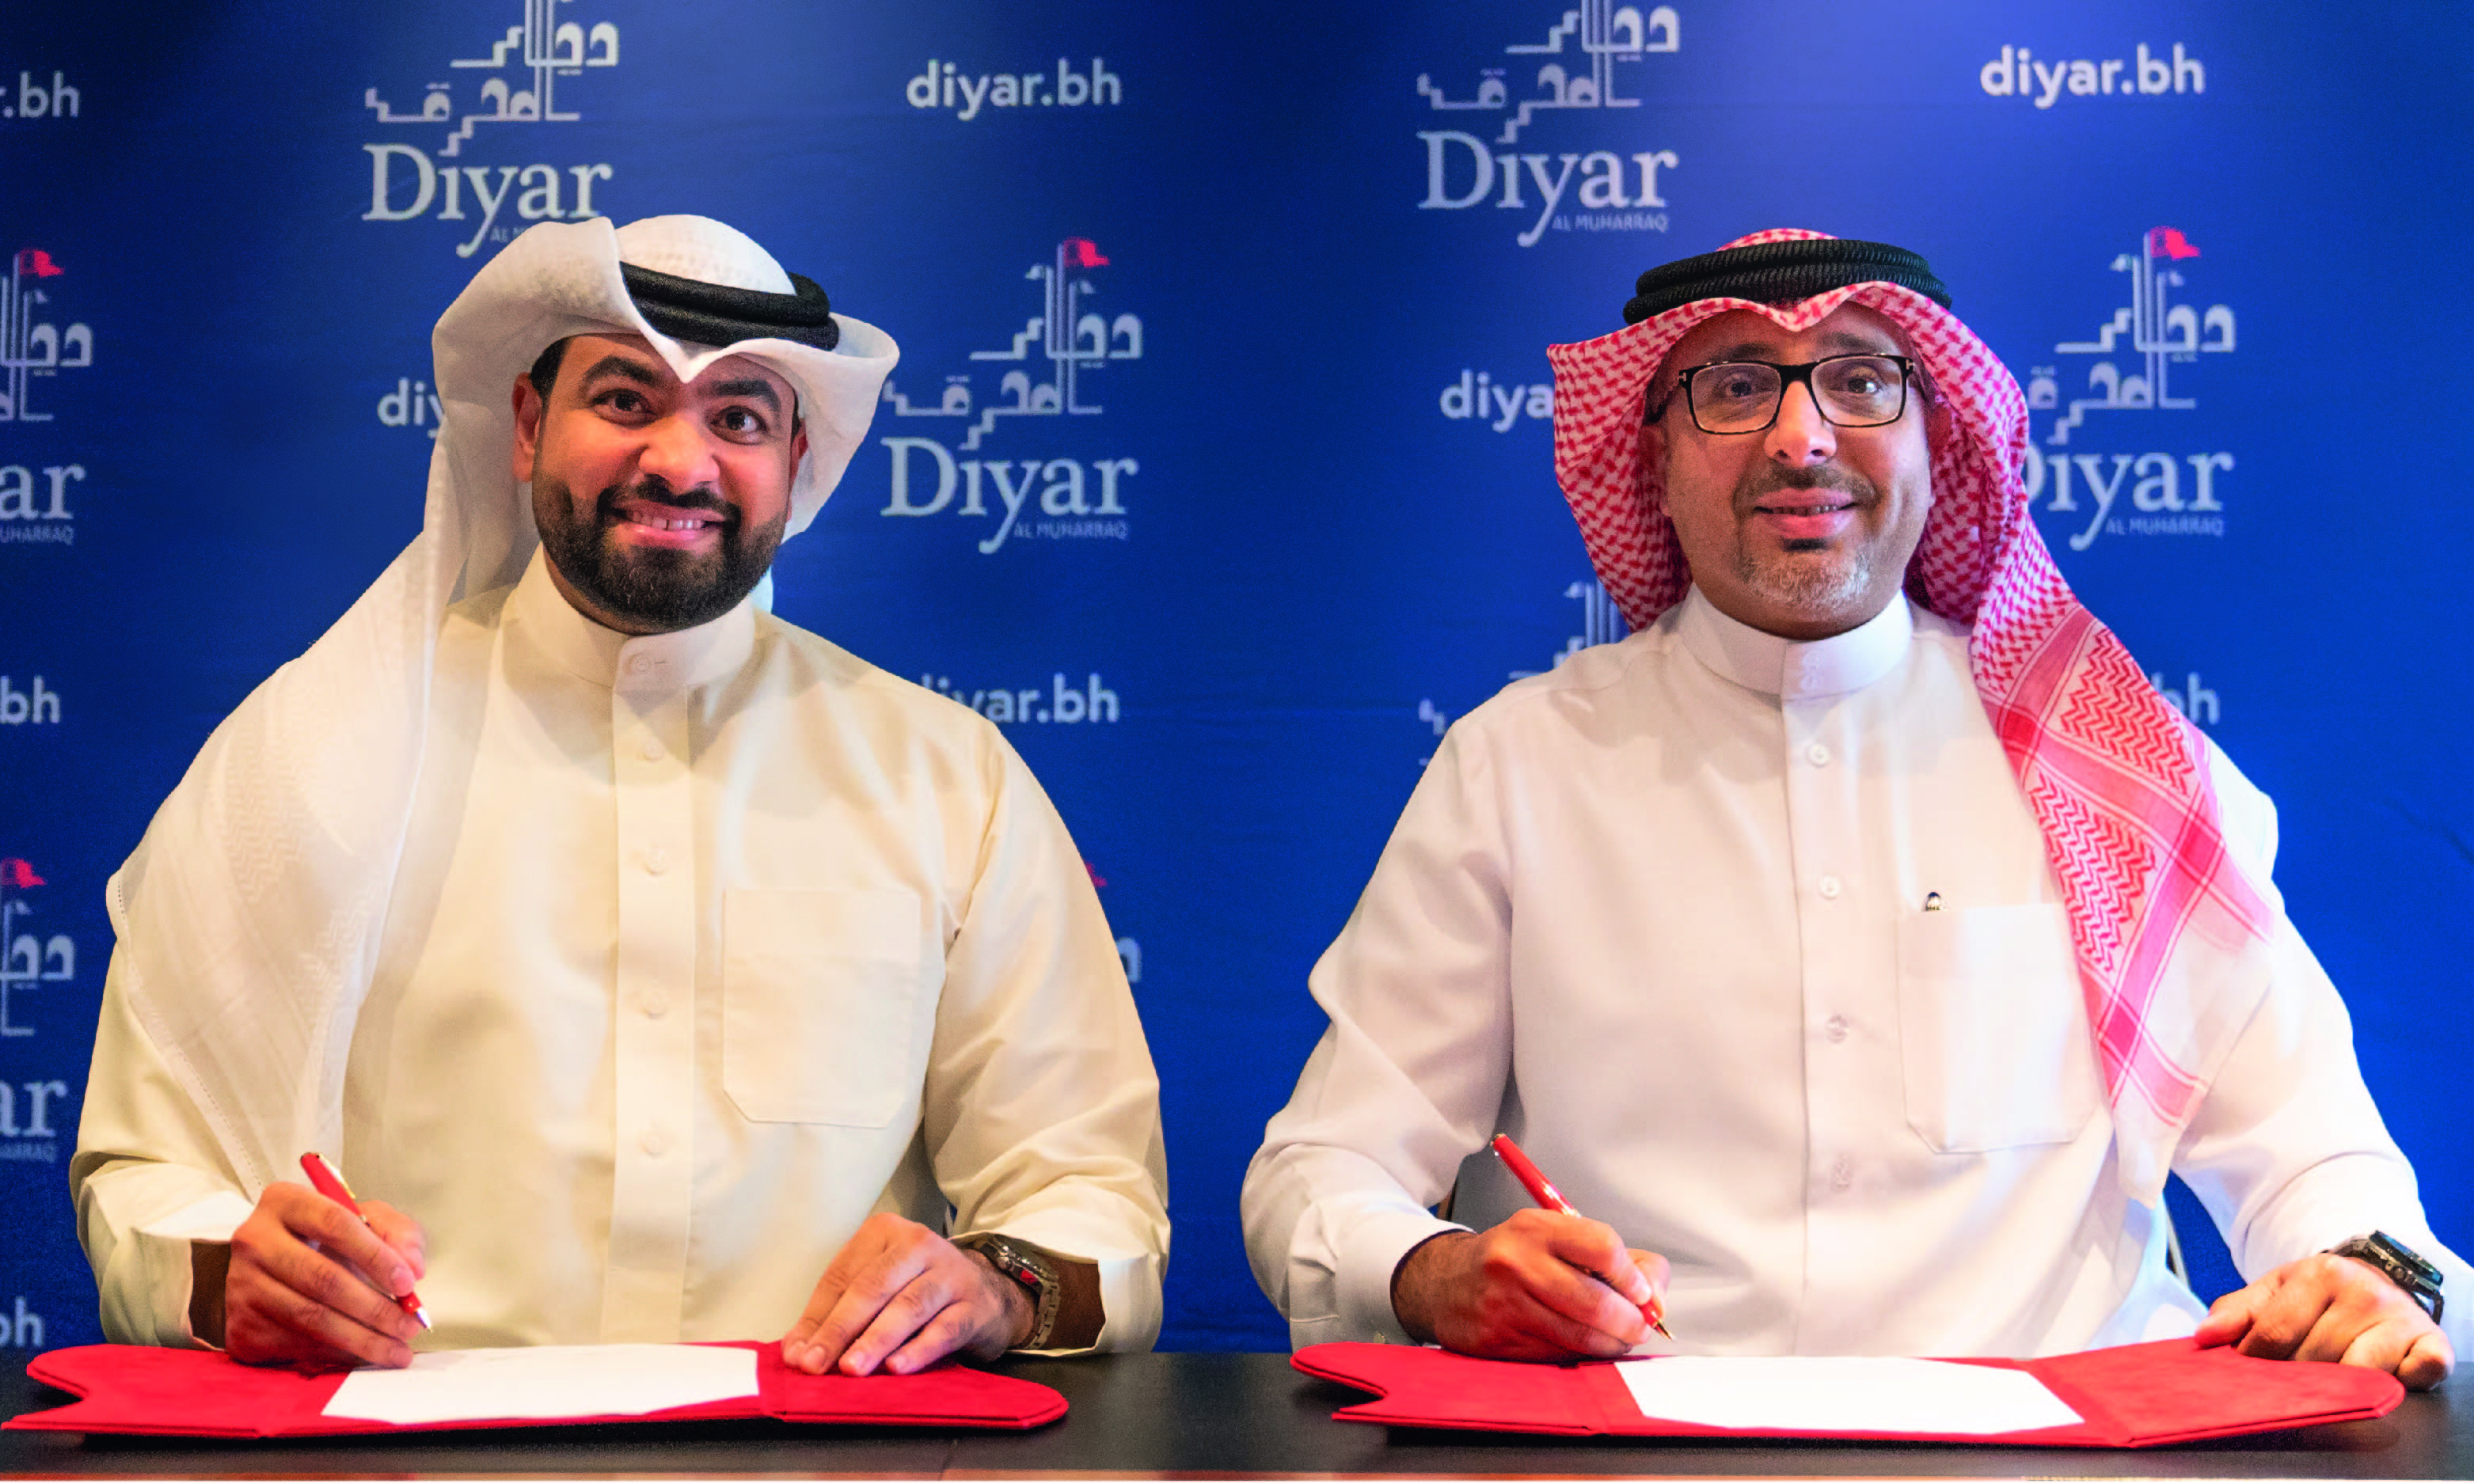 Diyar Al Muharraq Announces its Sponsorship of the First Padel Tournament in the Kingdom of Bahrain